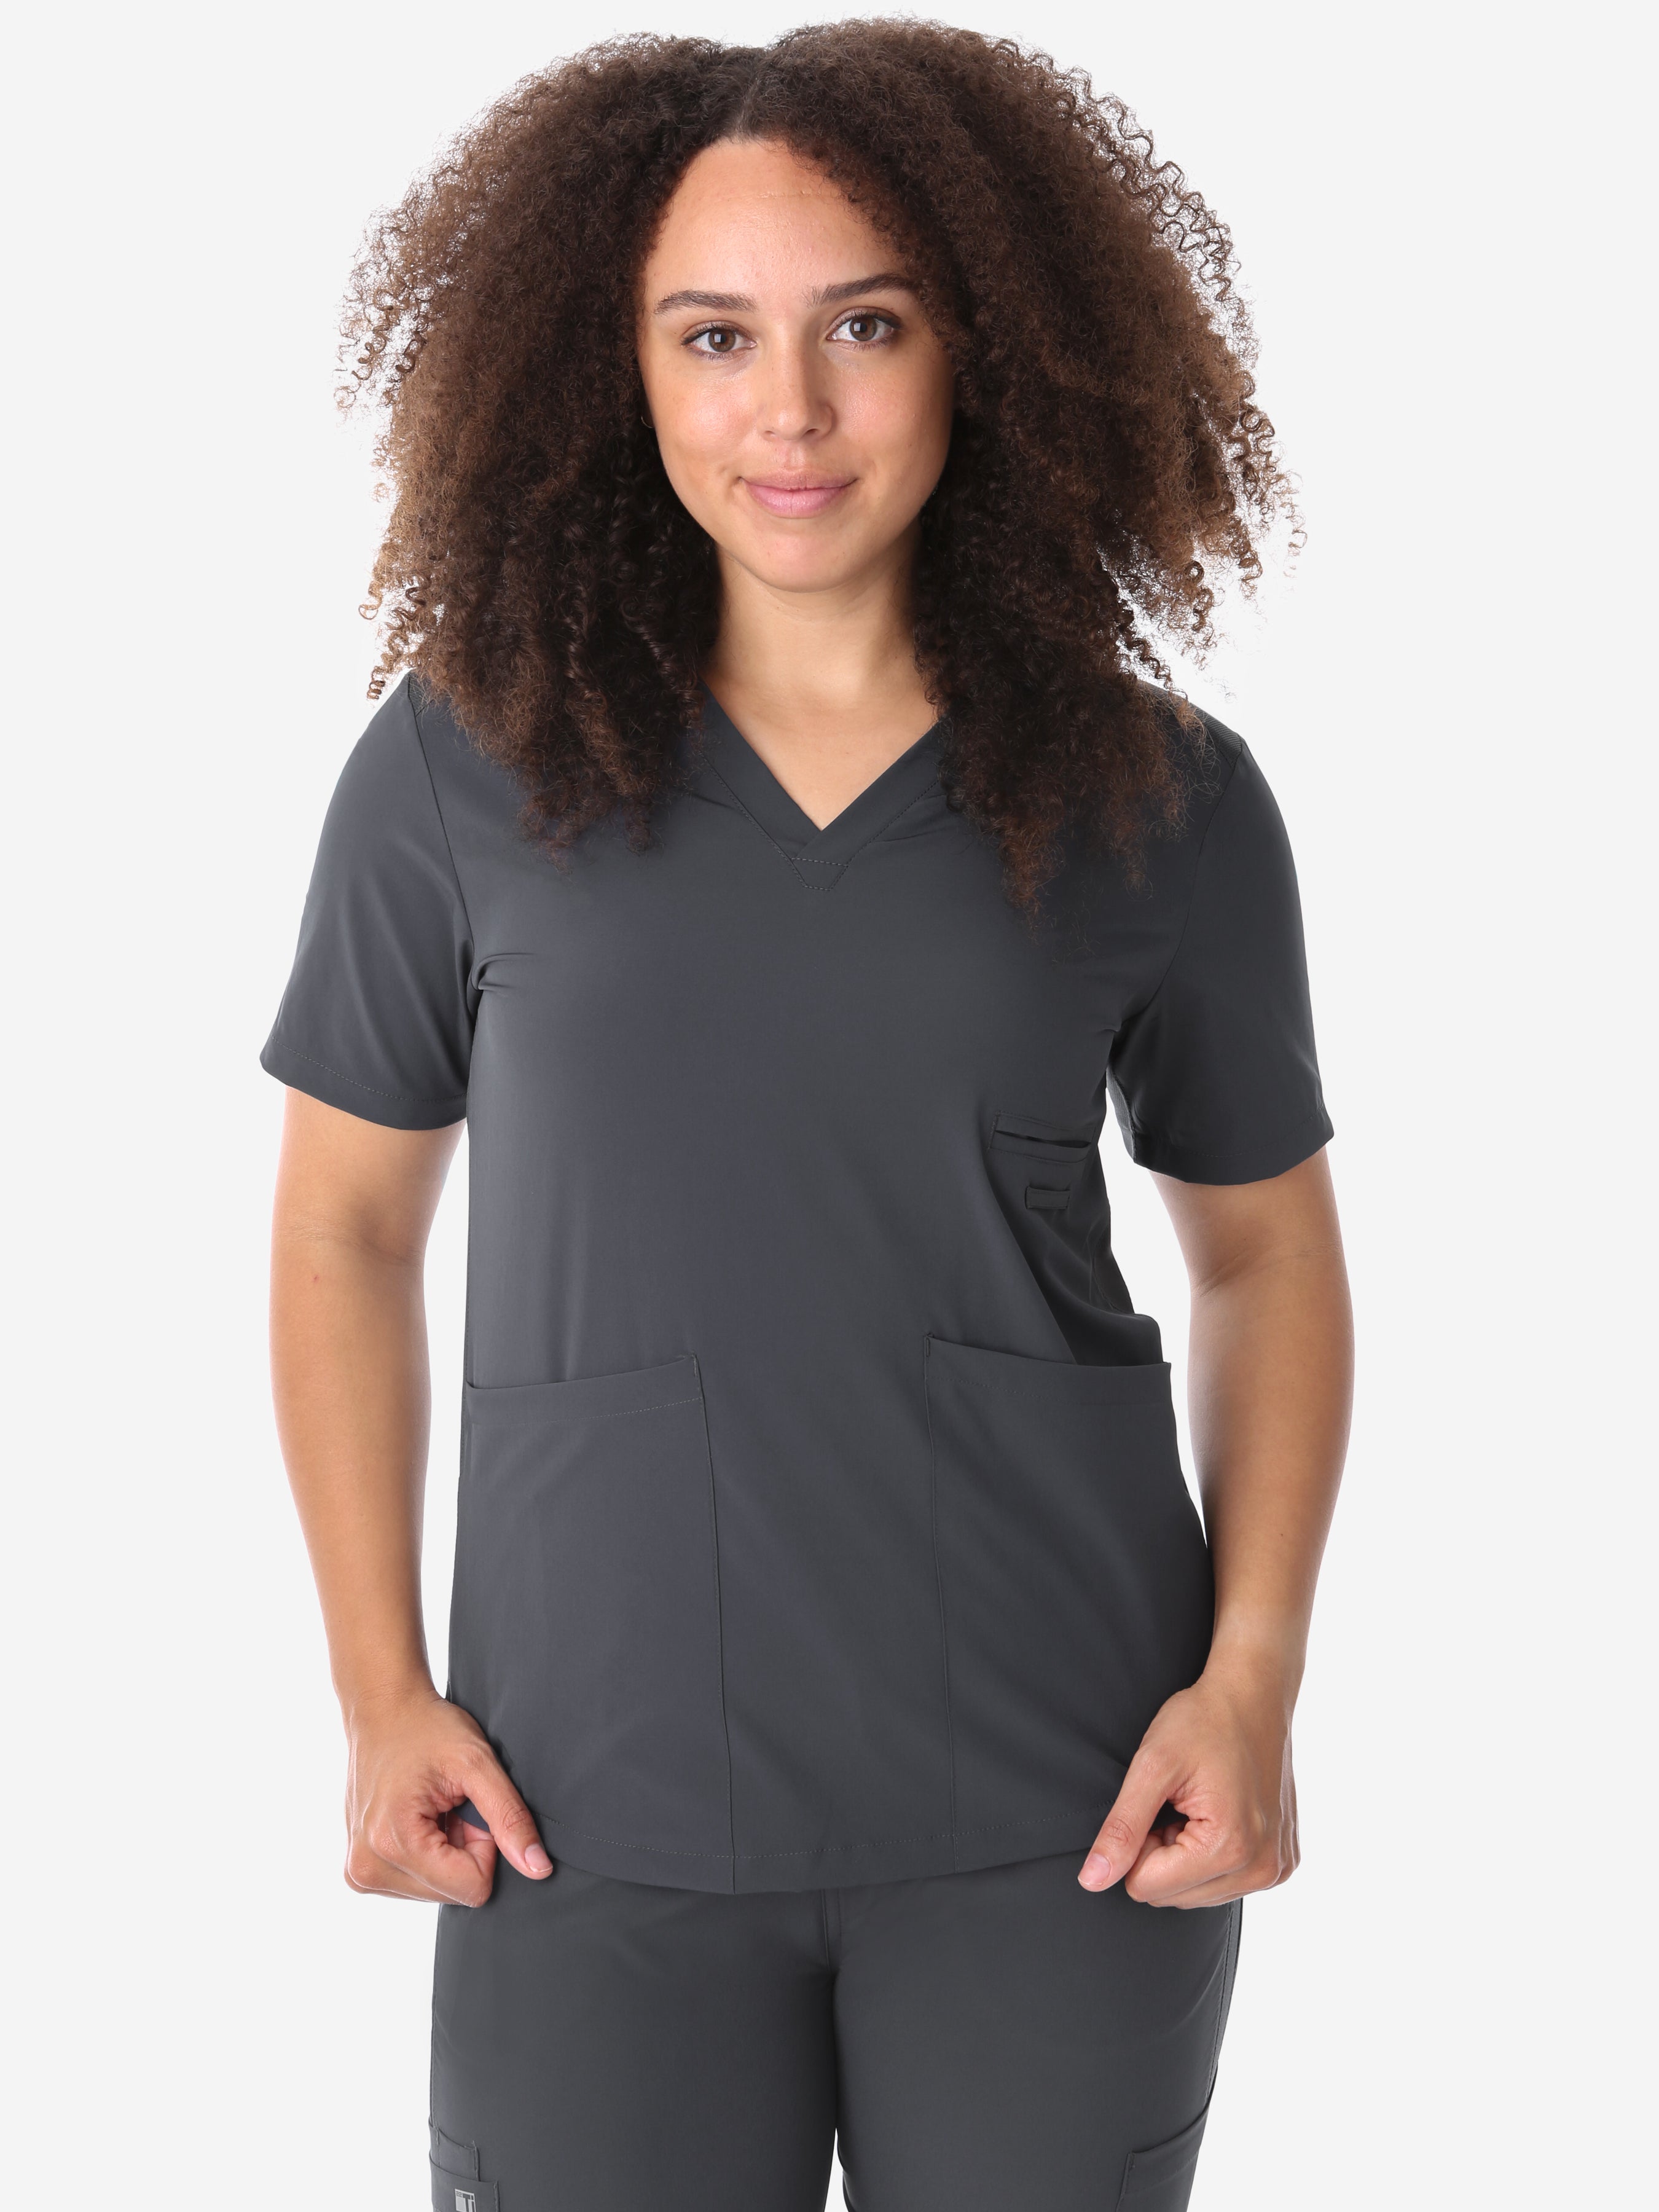 Women's Four-Pocket Scrub Top Charcoal Top Only Front View